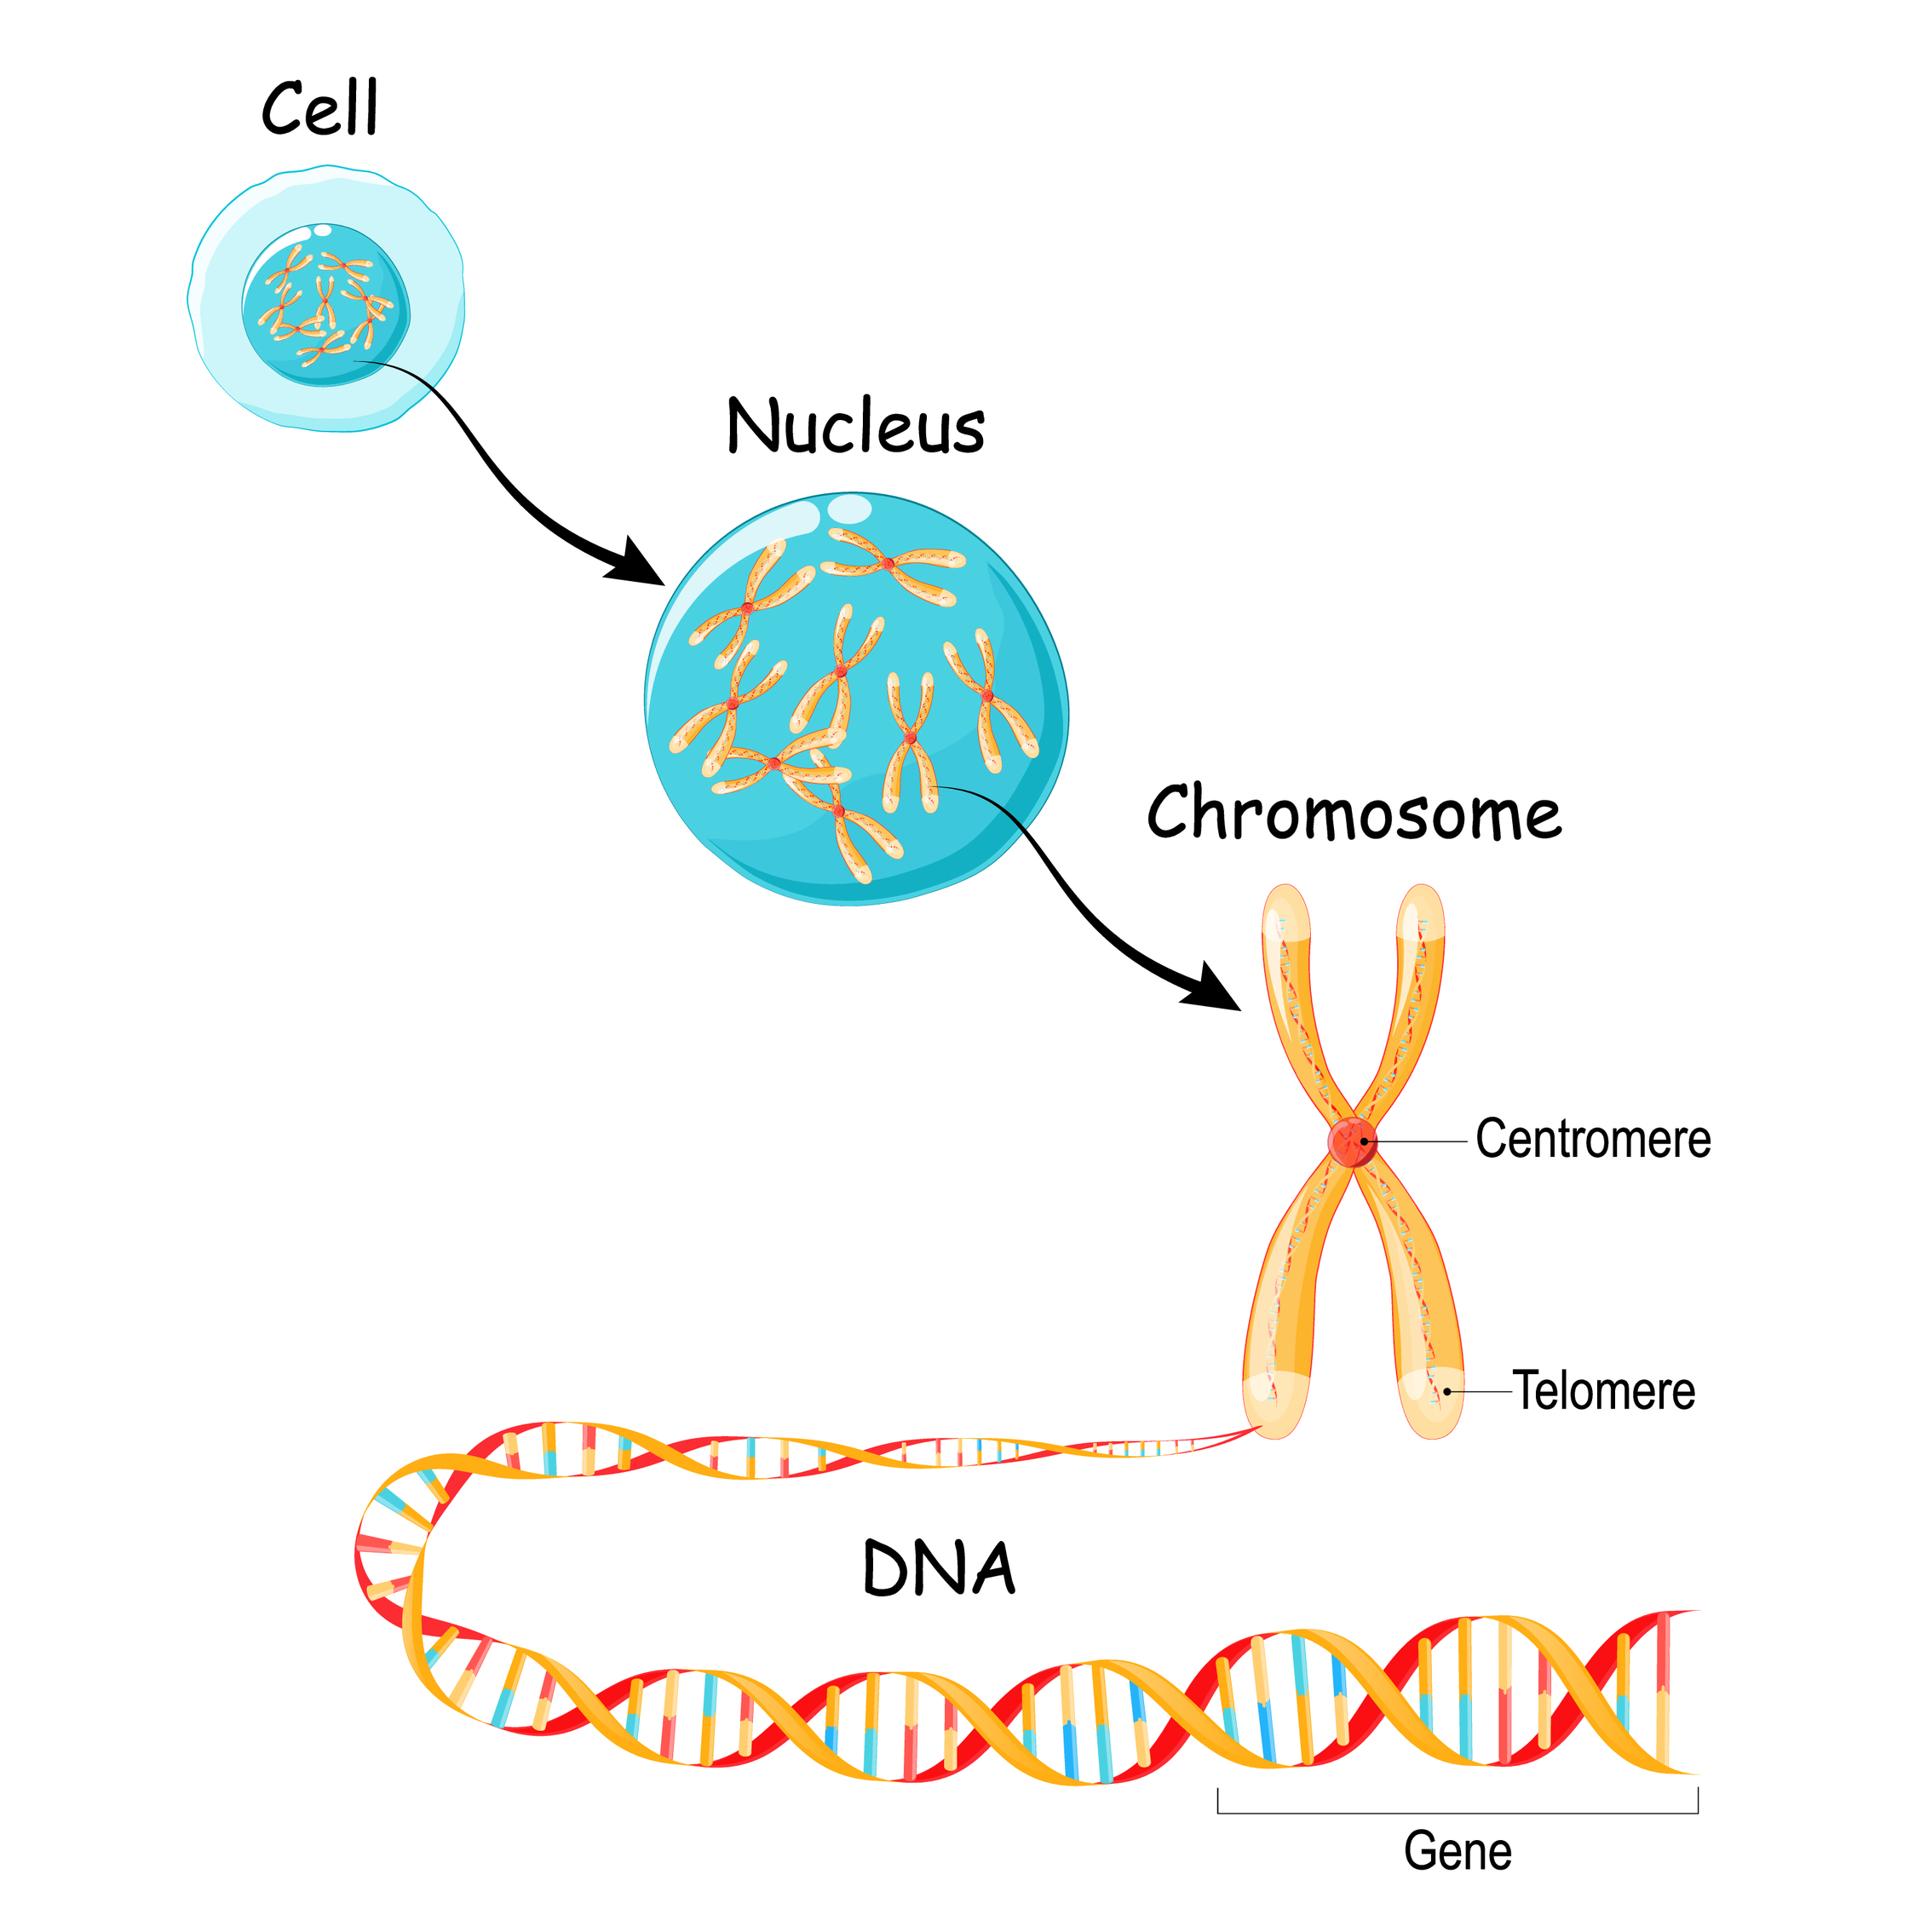 Image showing DNA structure and location in a cell